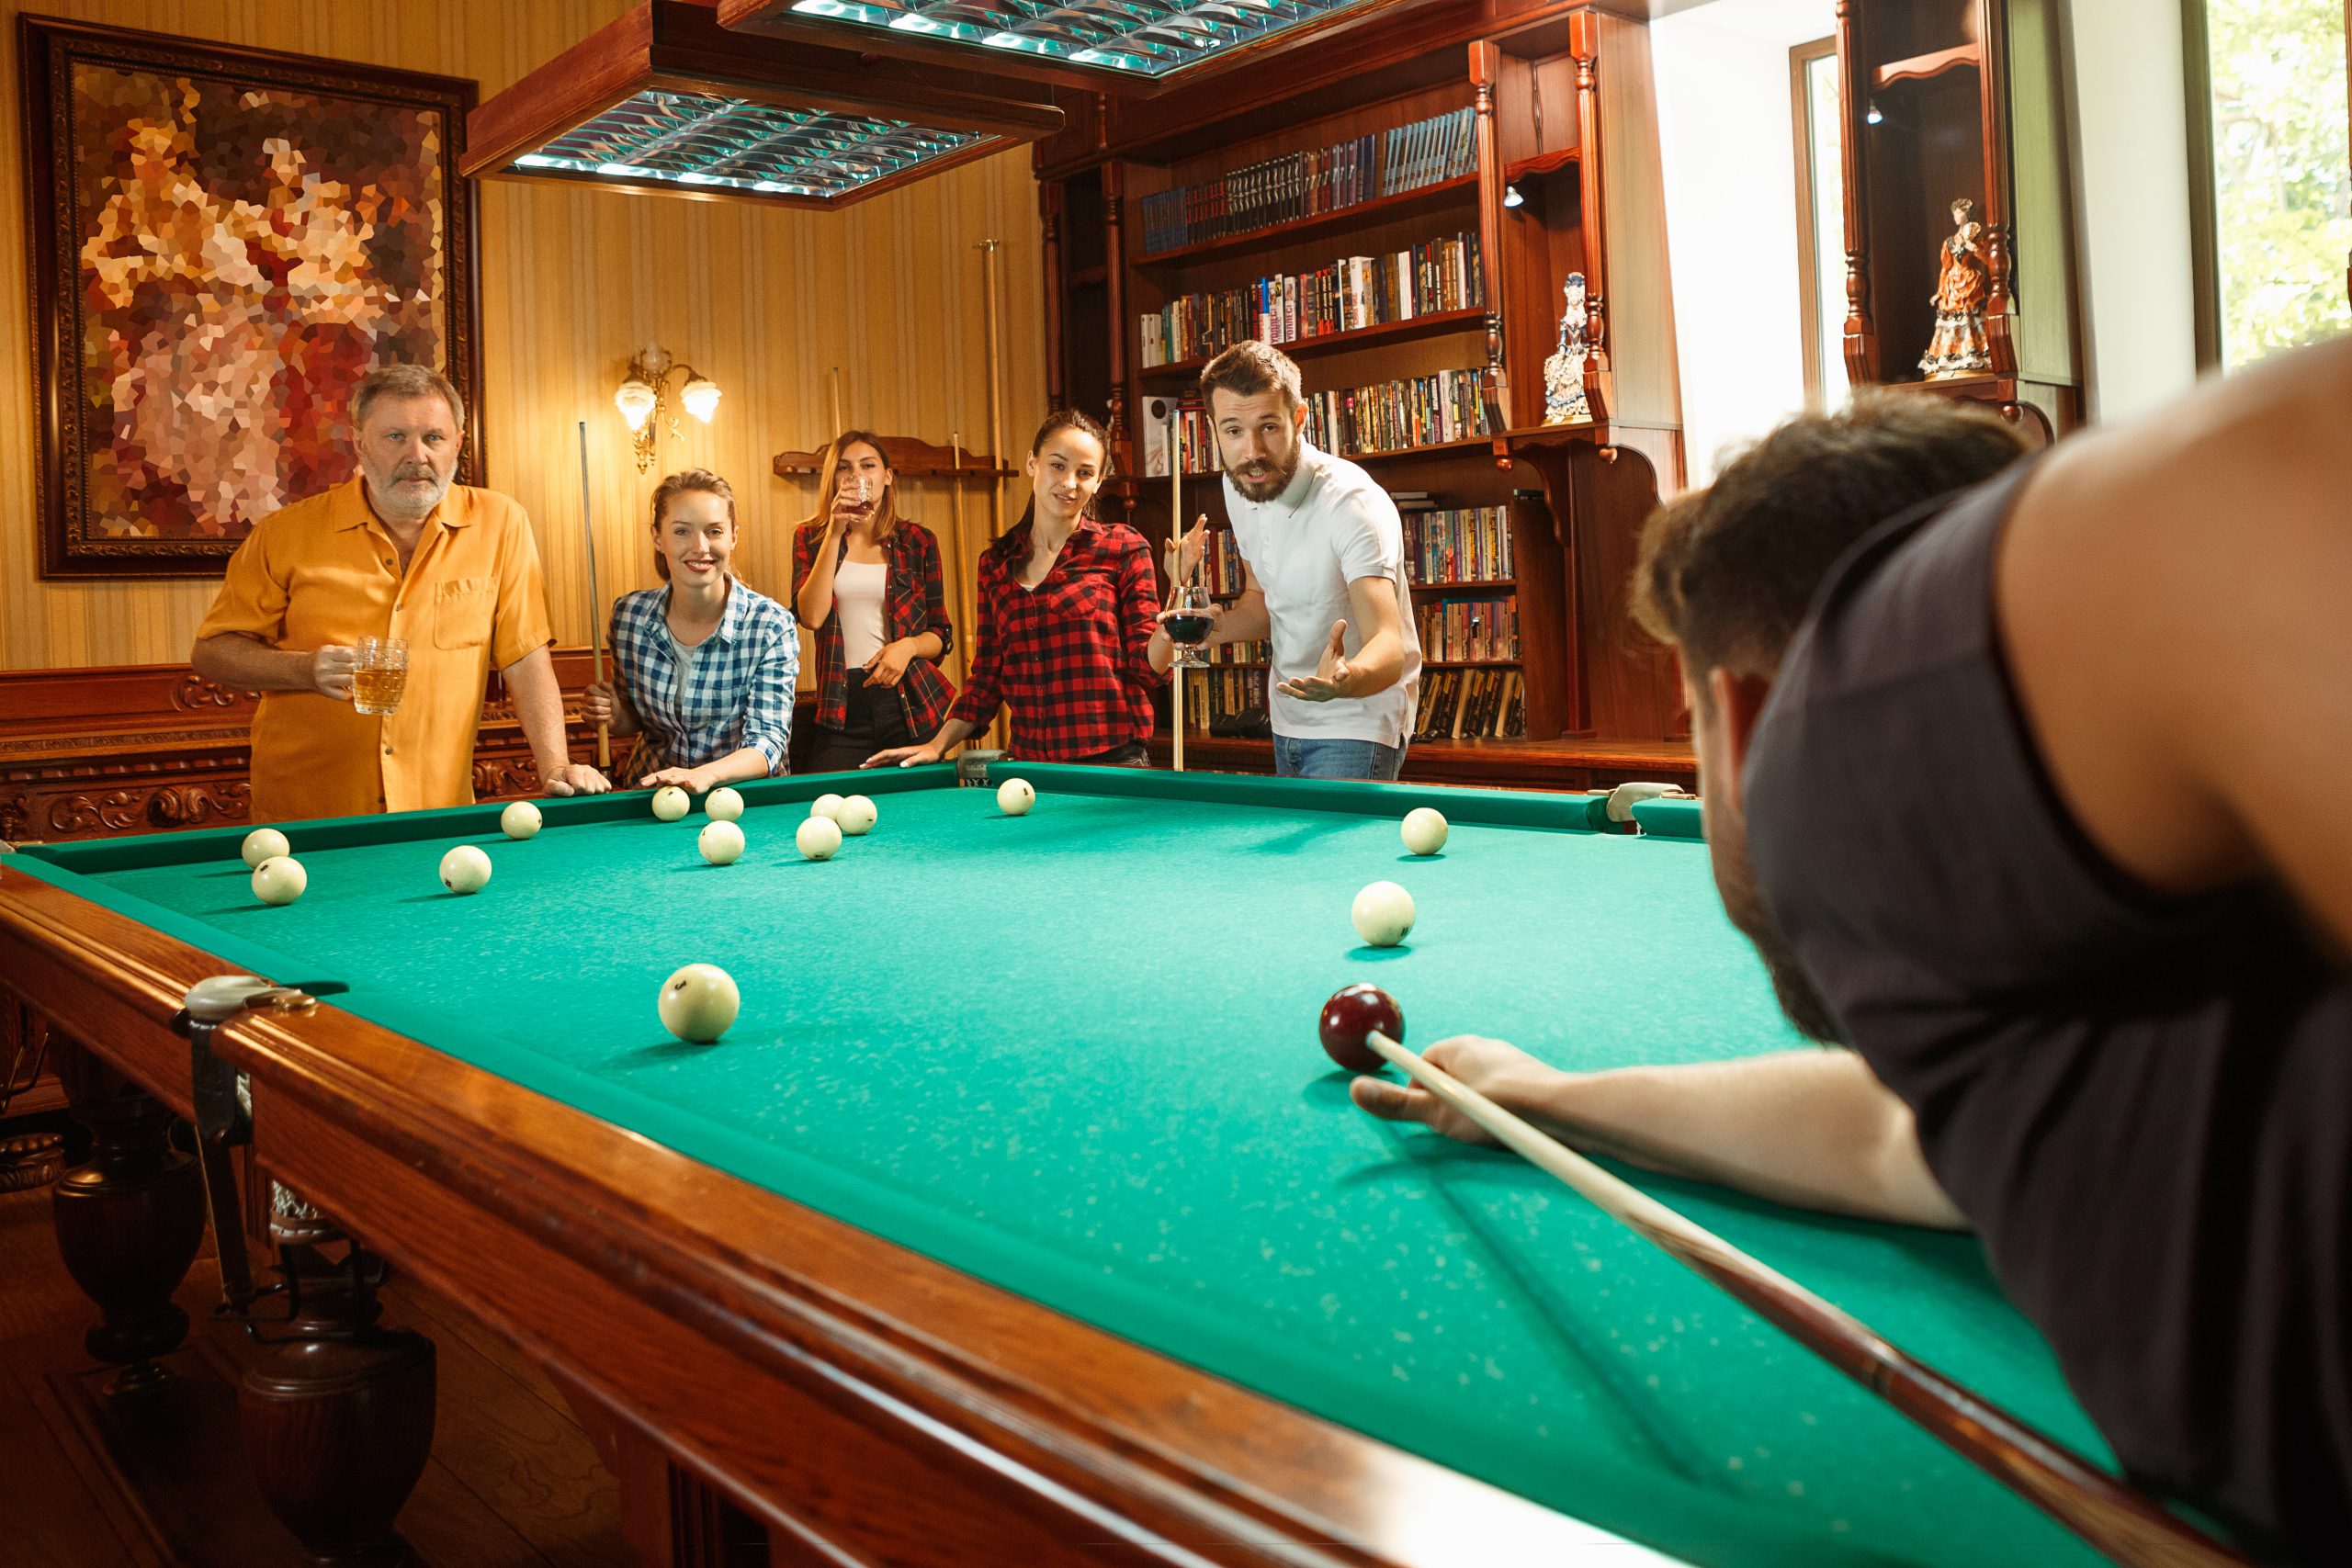 Young smiling men and women playing billiards at office or home after work. Business colleagues involving in recreational activity. Friendship, leisure activity, game concept. Human emotions concepts